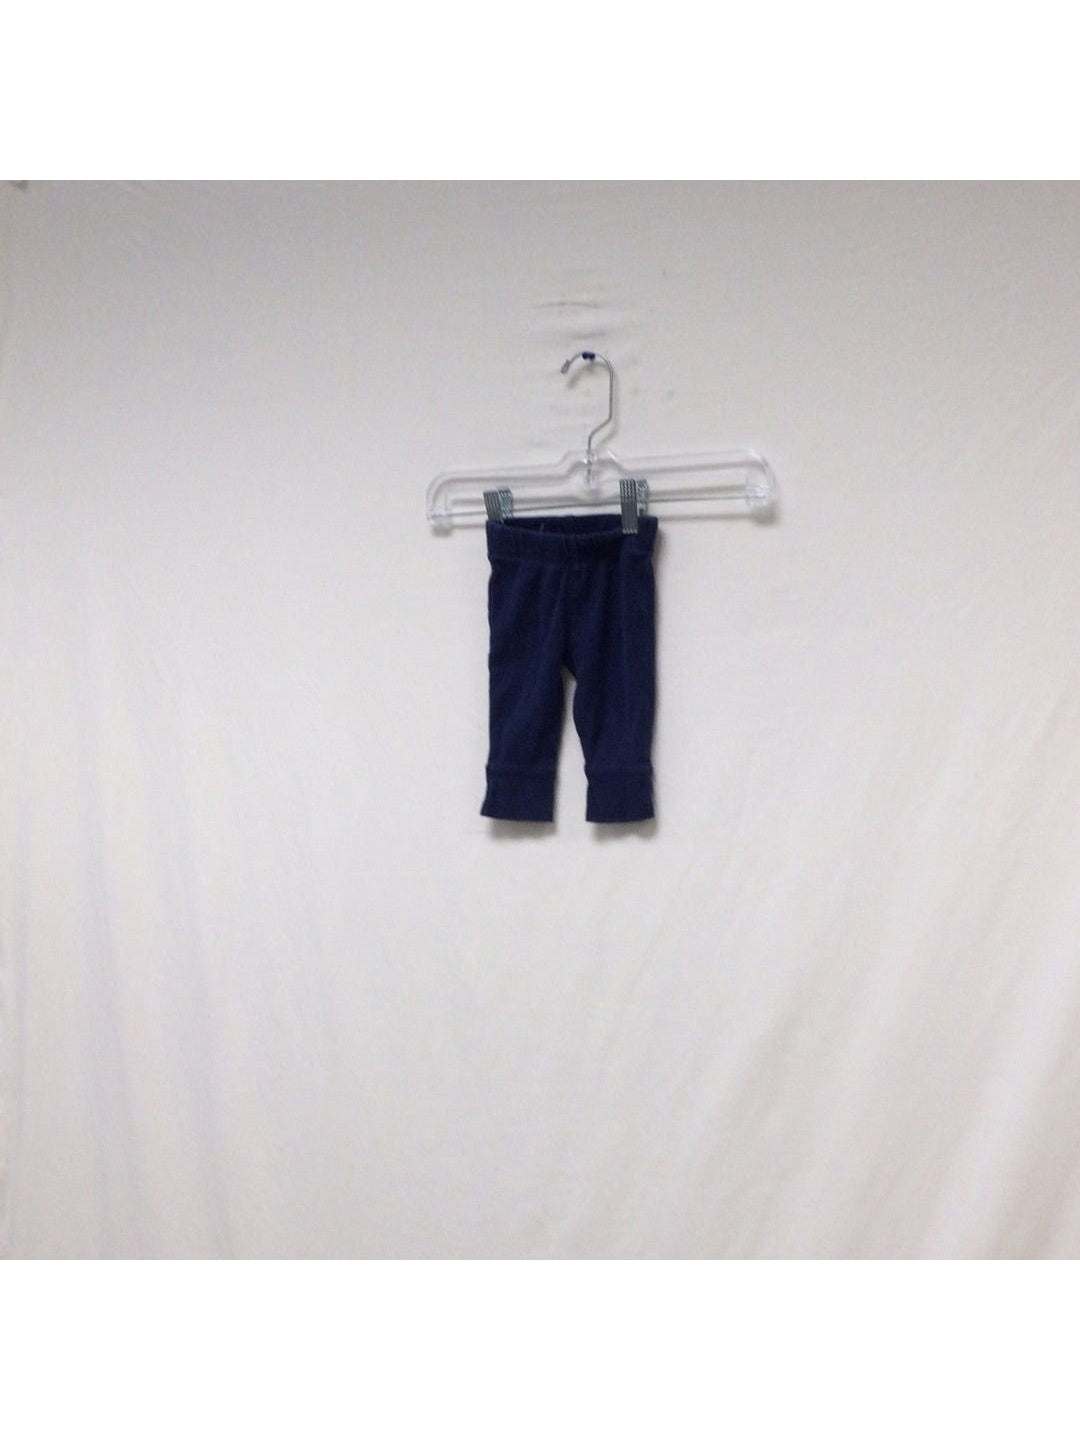 Carters Baby Boy 3 Months Blue Long Pants - The Kennedy Collective Thrift - 